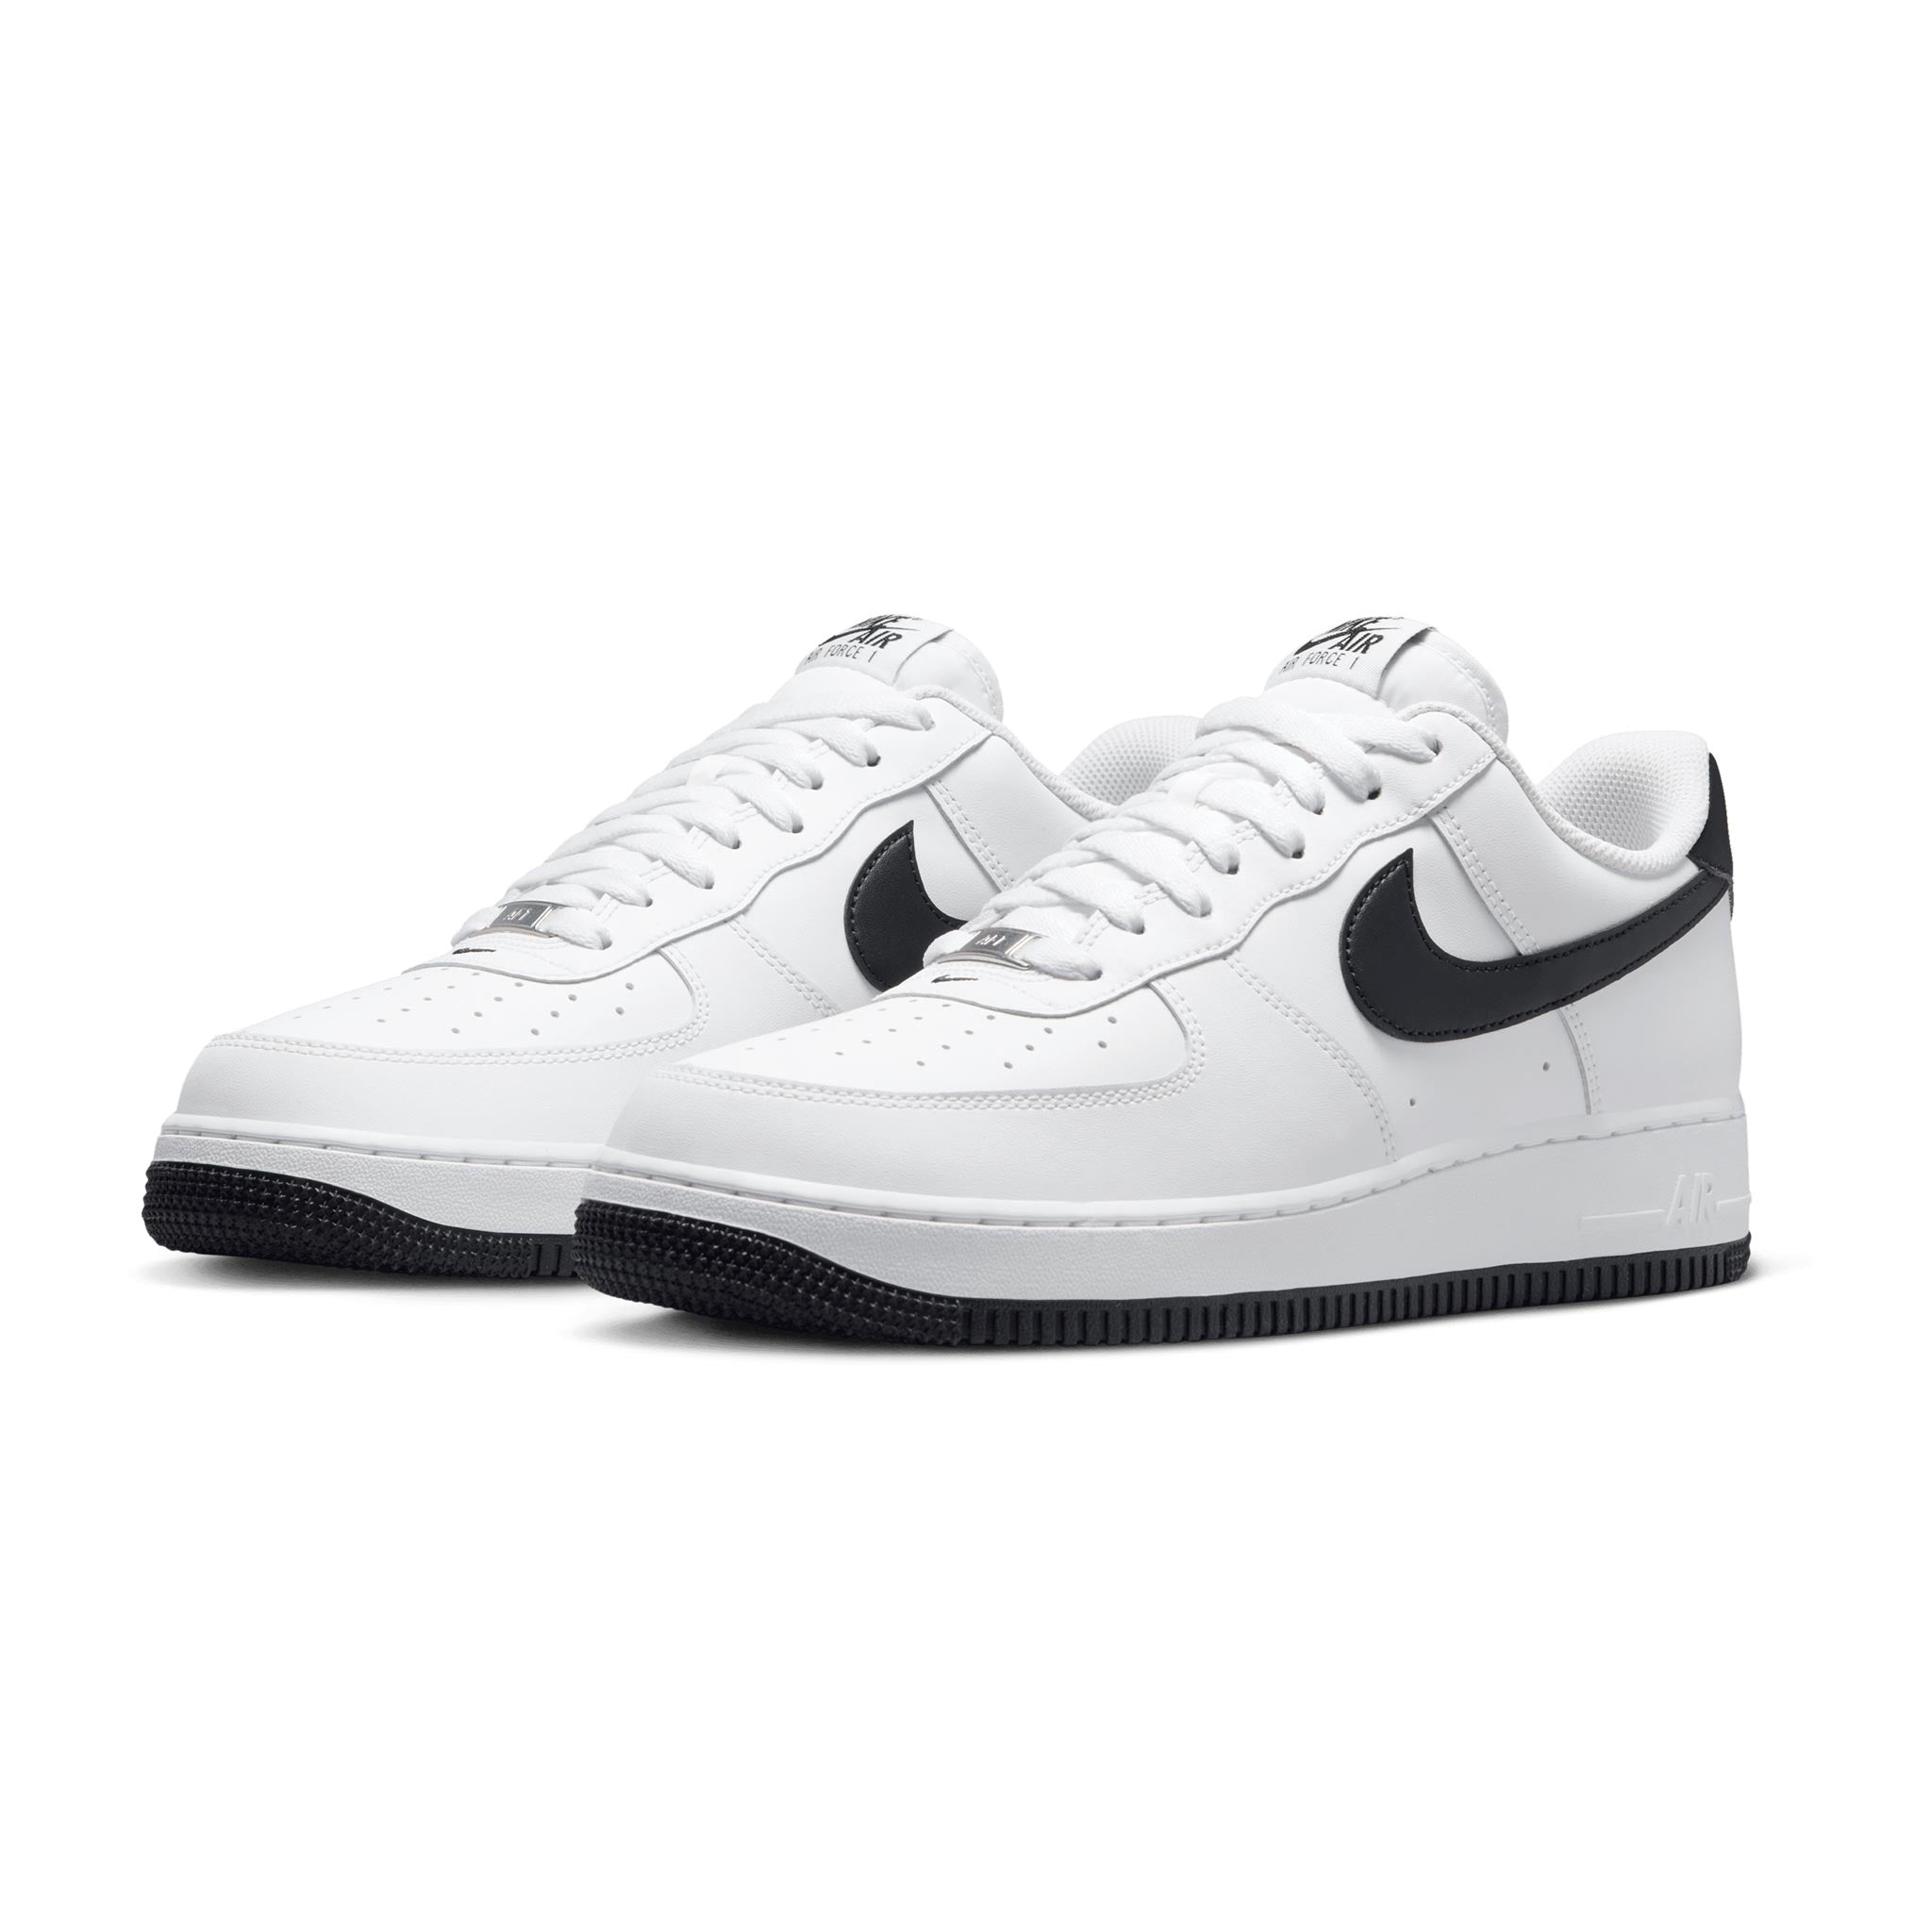 The Nike 'Wolf Grey' Is The Perfect Blend Of Simplicity And Sophistication